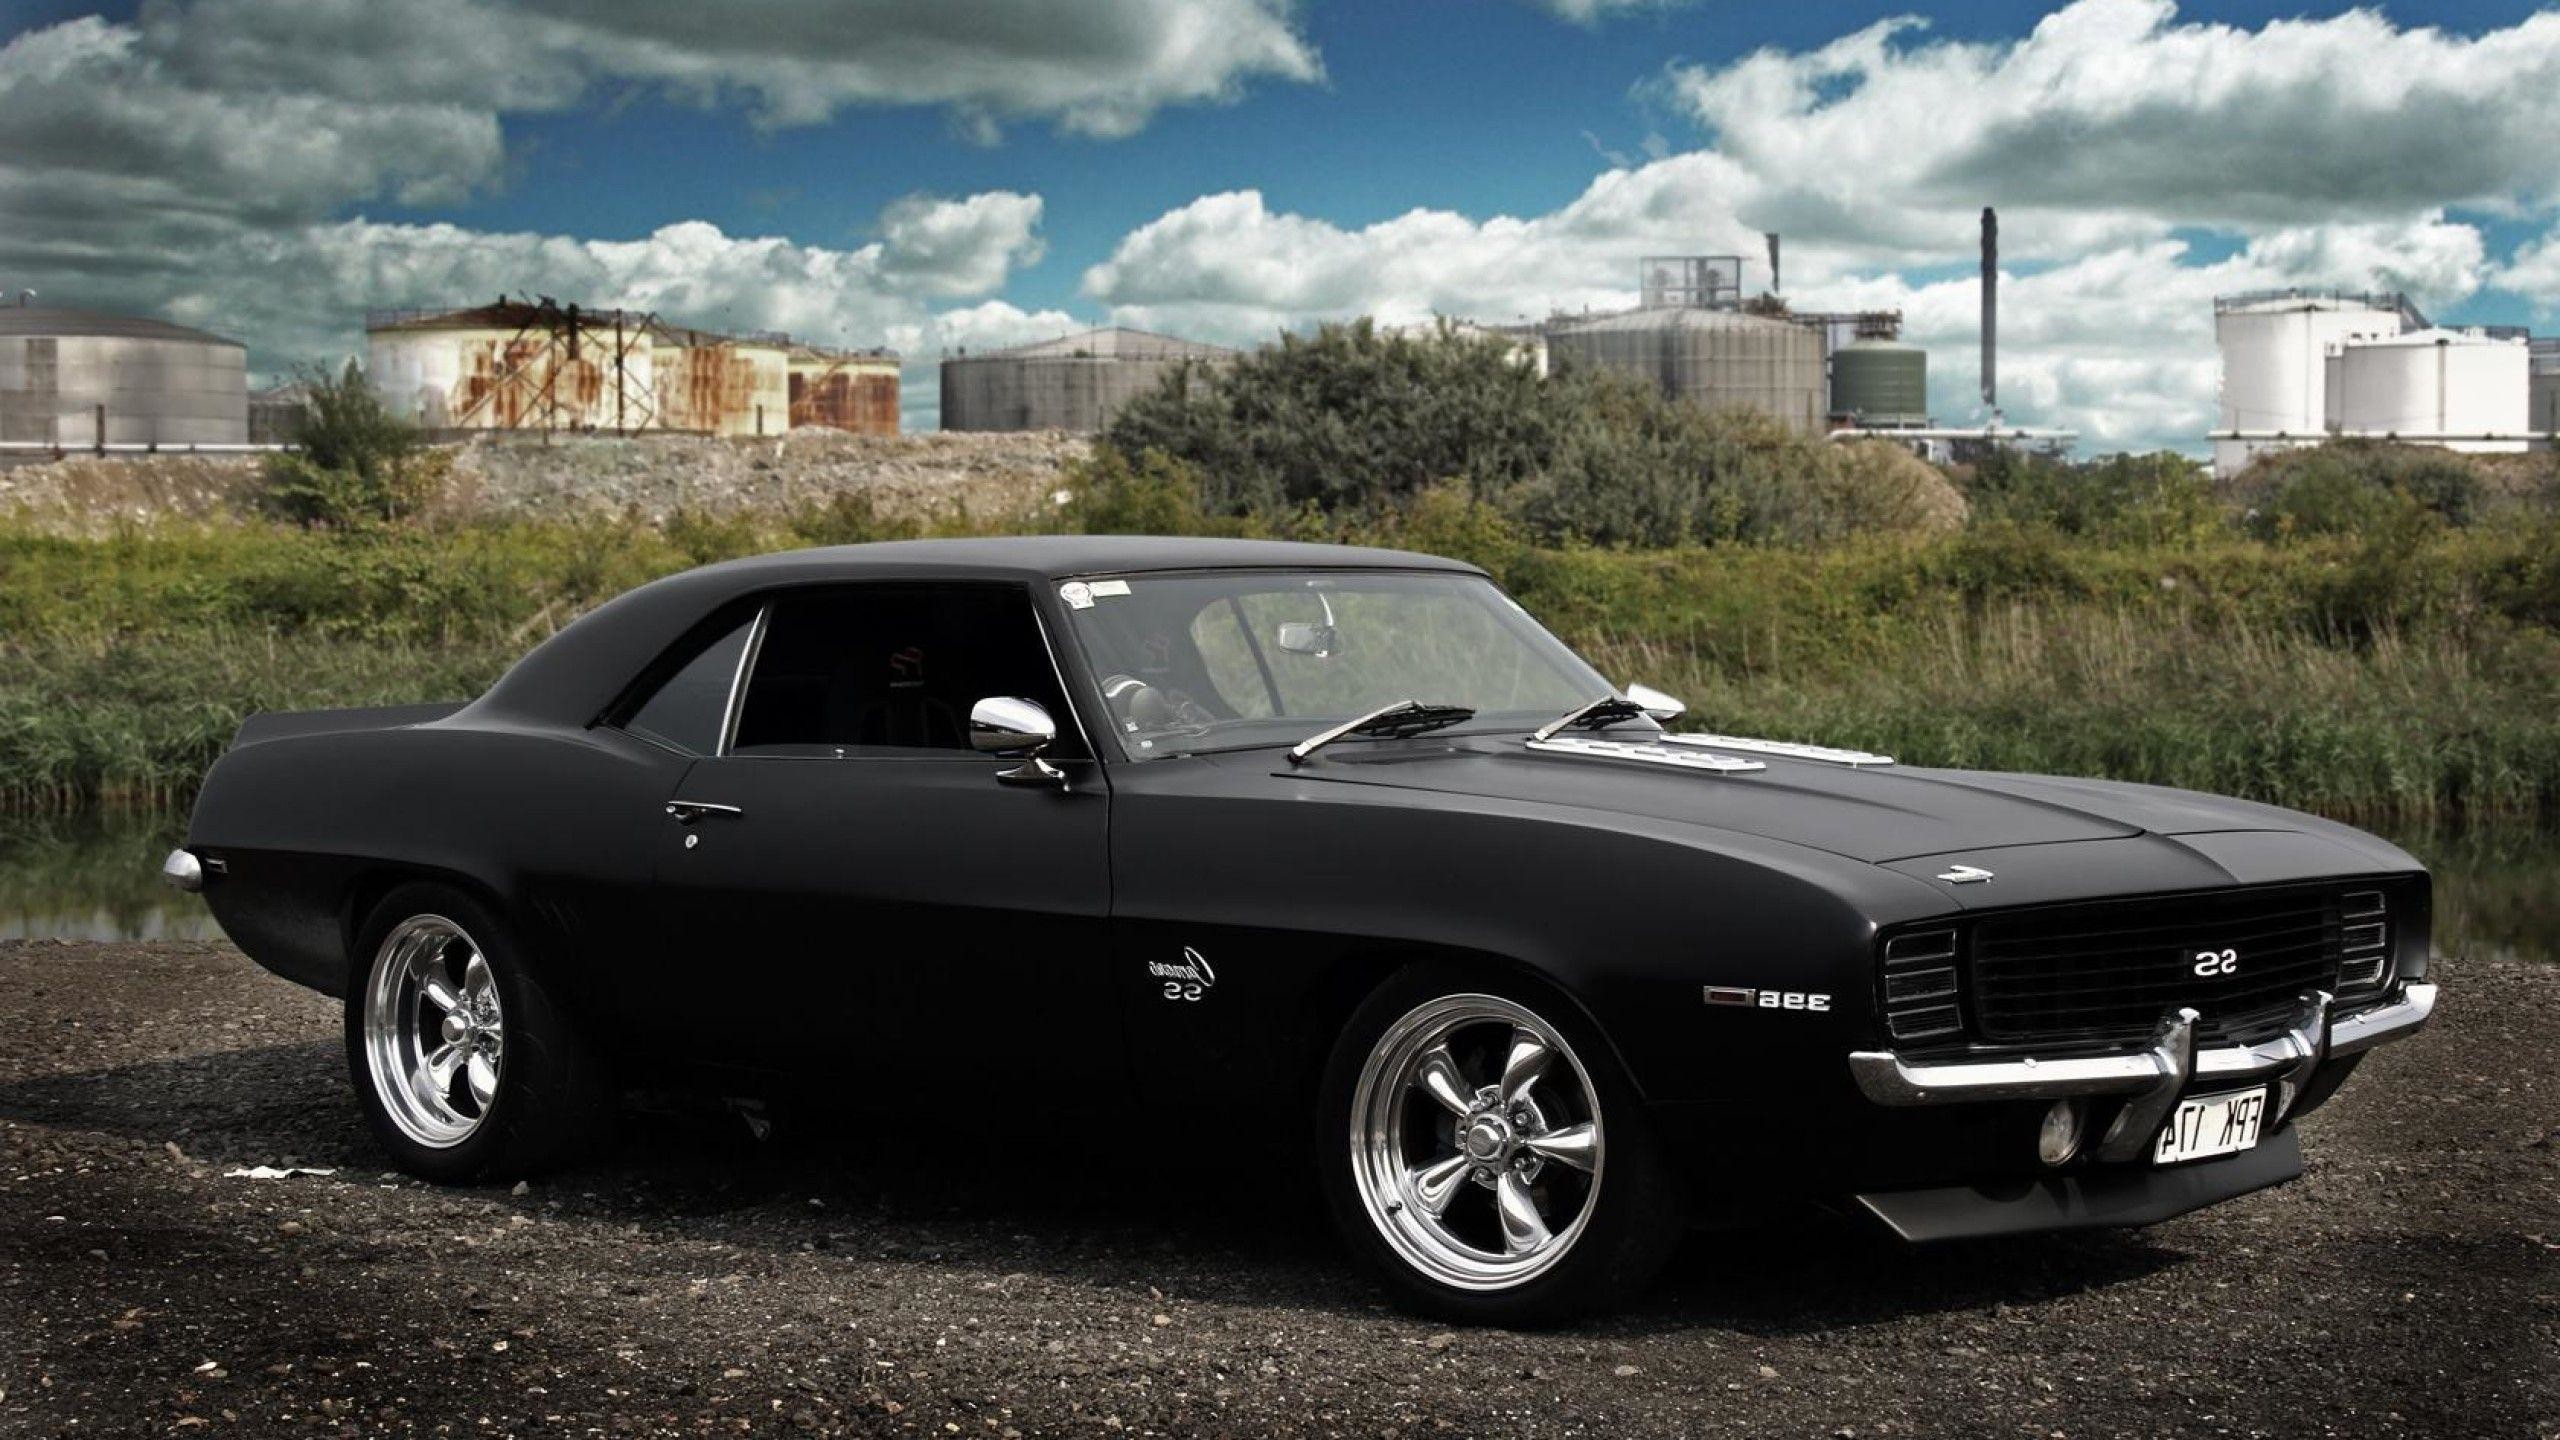 Muscle Car Screensavers and Wallpaper (72+ images) Muscle Car Wallpaper 1920x1080